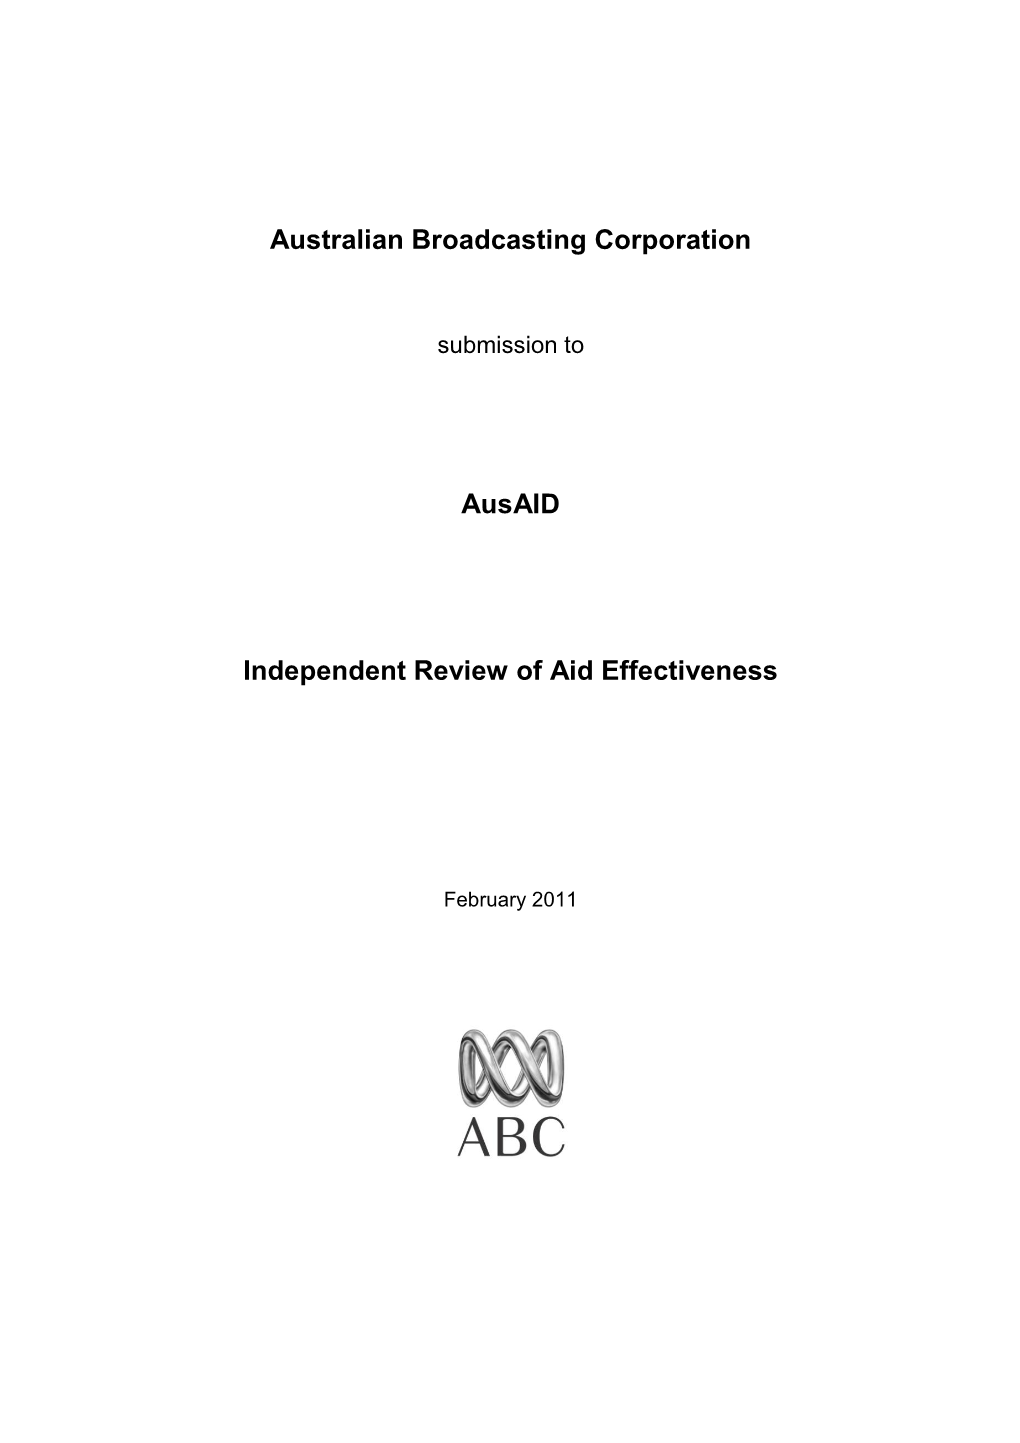 Ausaid's Independent Review of Aid Effectiveness